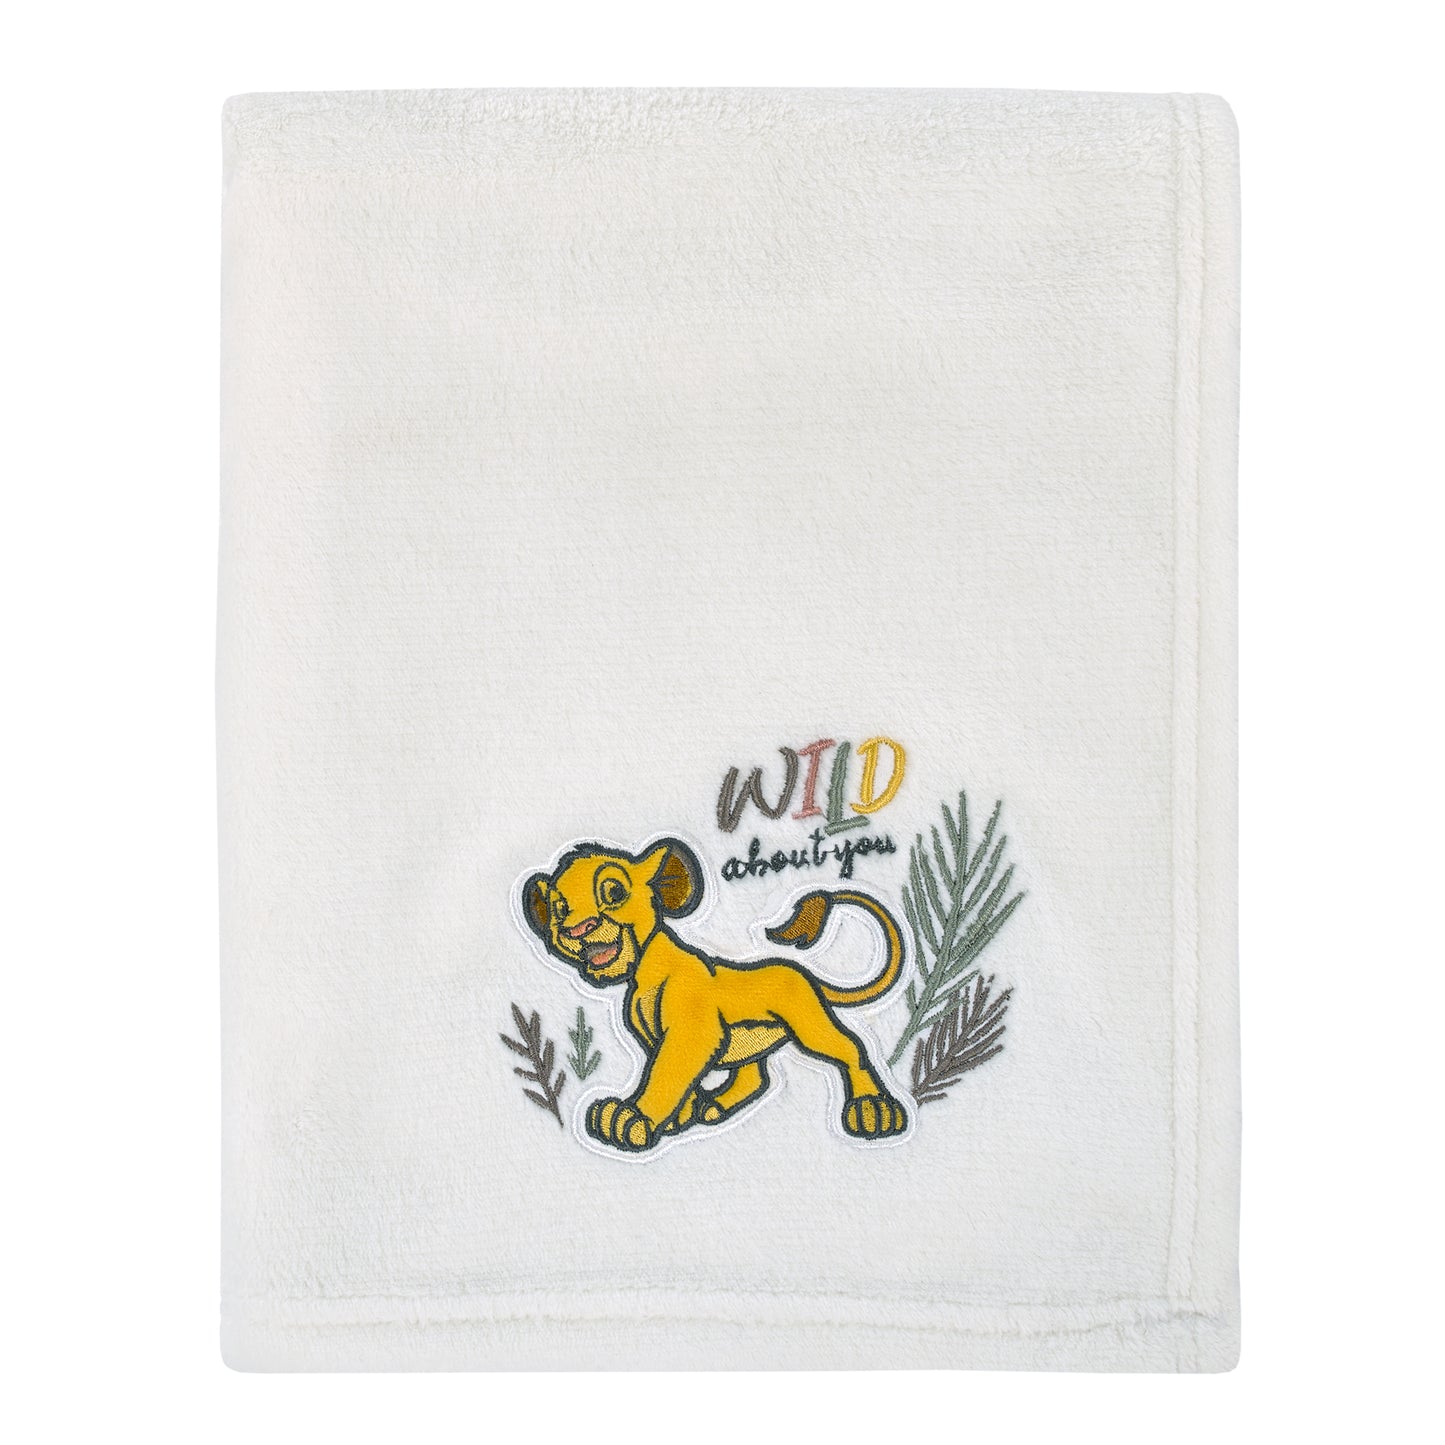 Disney Lion King - Wild About You Ivory Simba Super Soft Baby Blanket with Applique